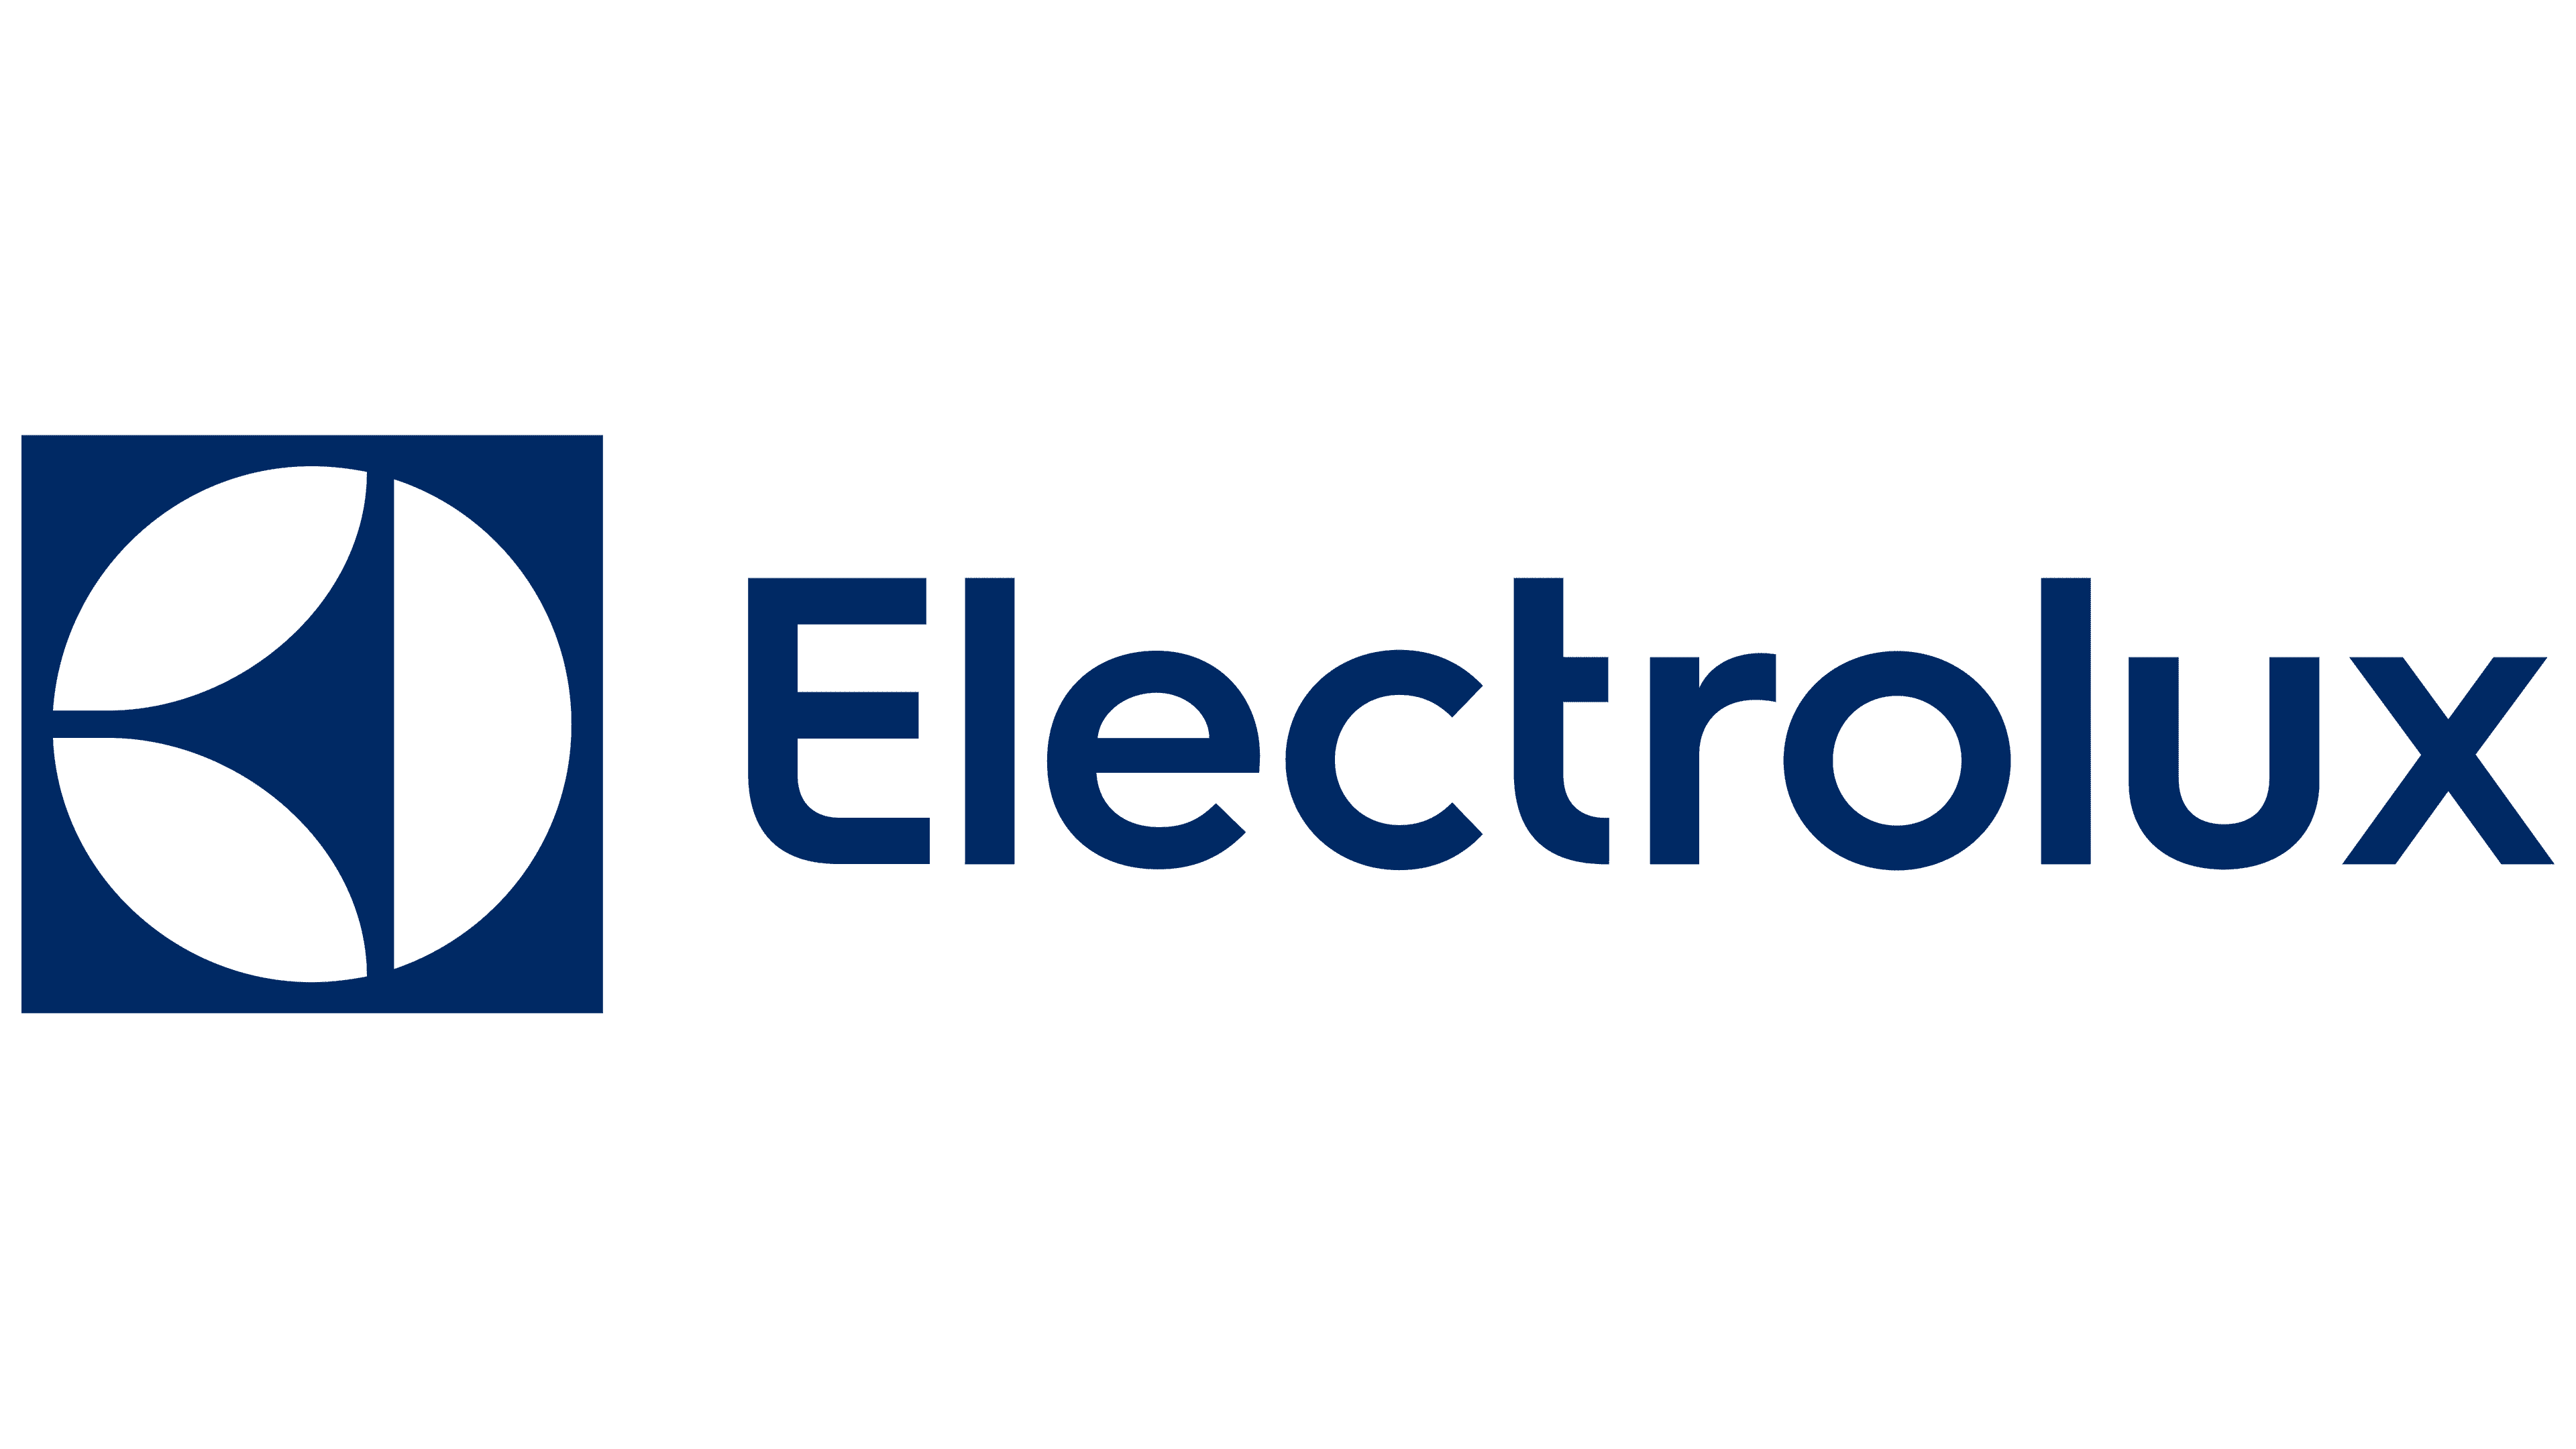 Electrolux Coupons & Promo Codes